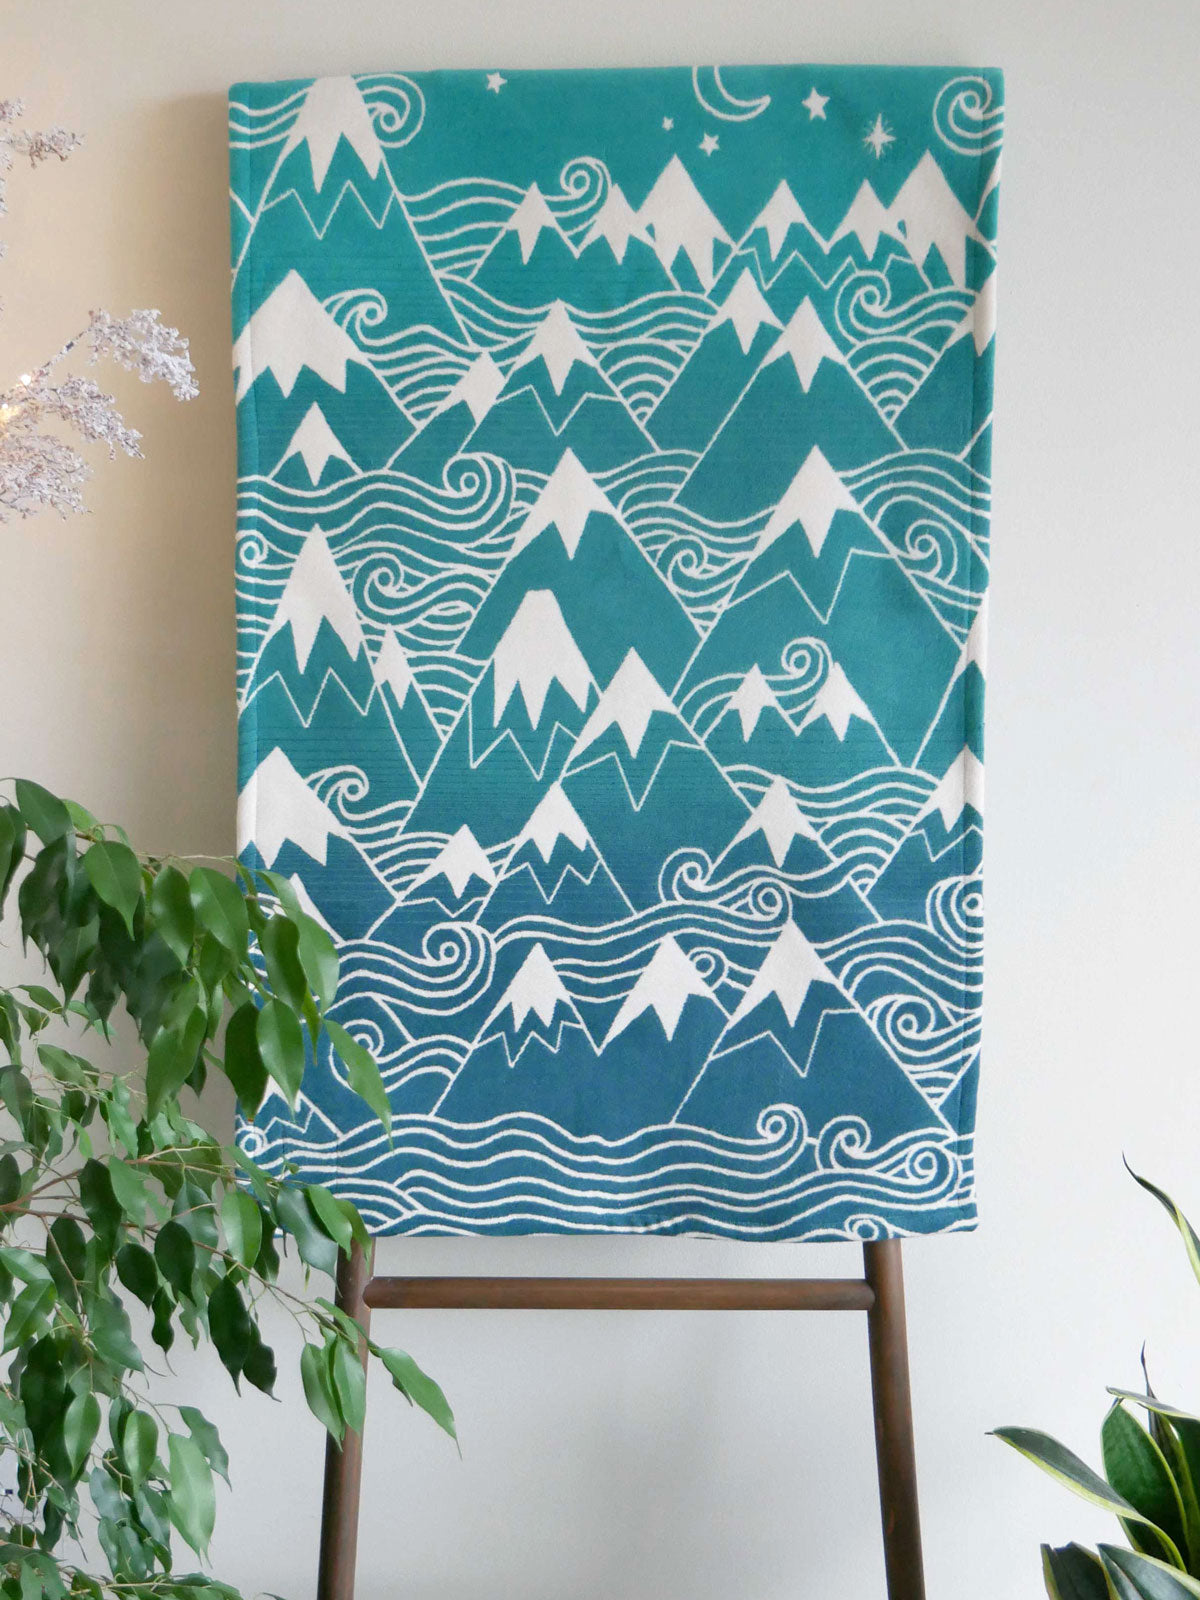 Misty Mountains Moonlit Brushed Cotton Baby Blanket